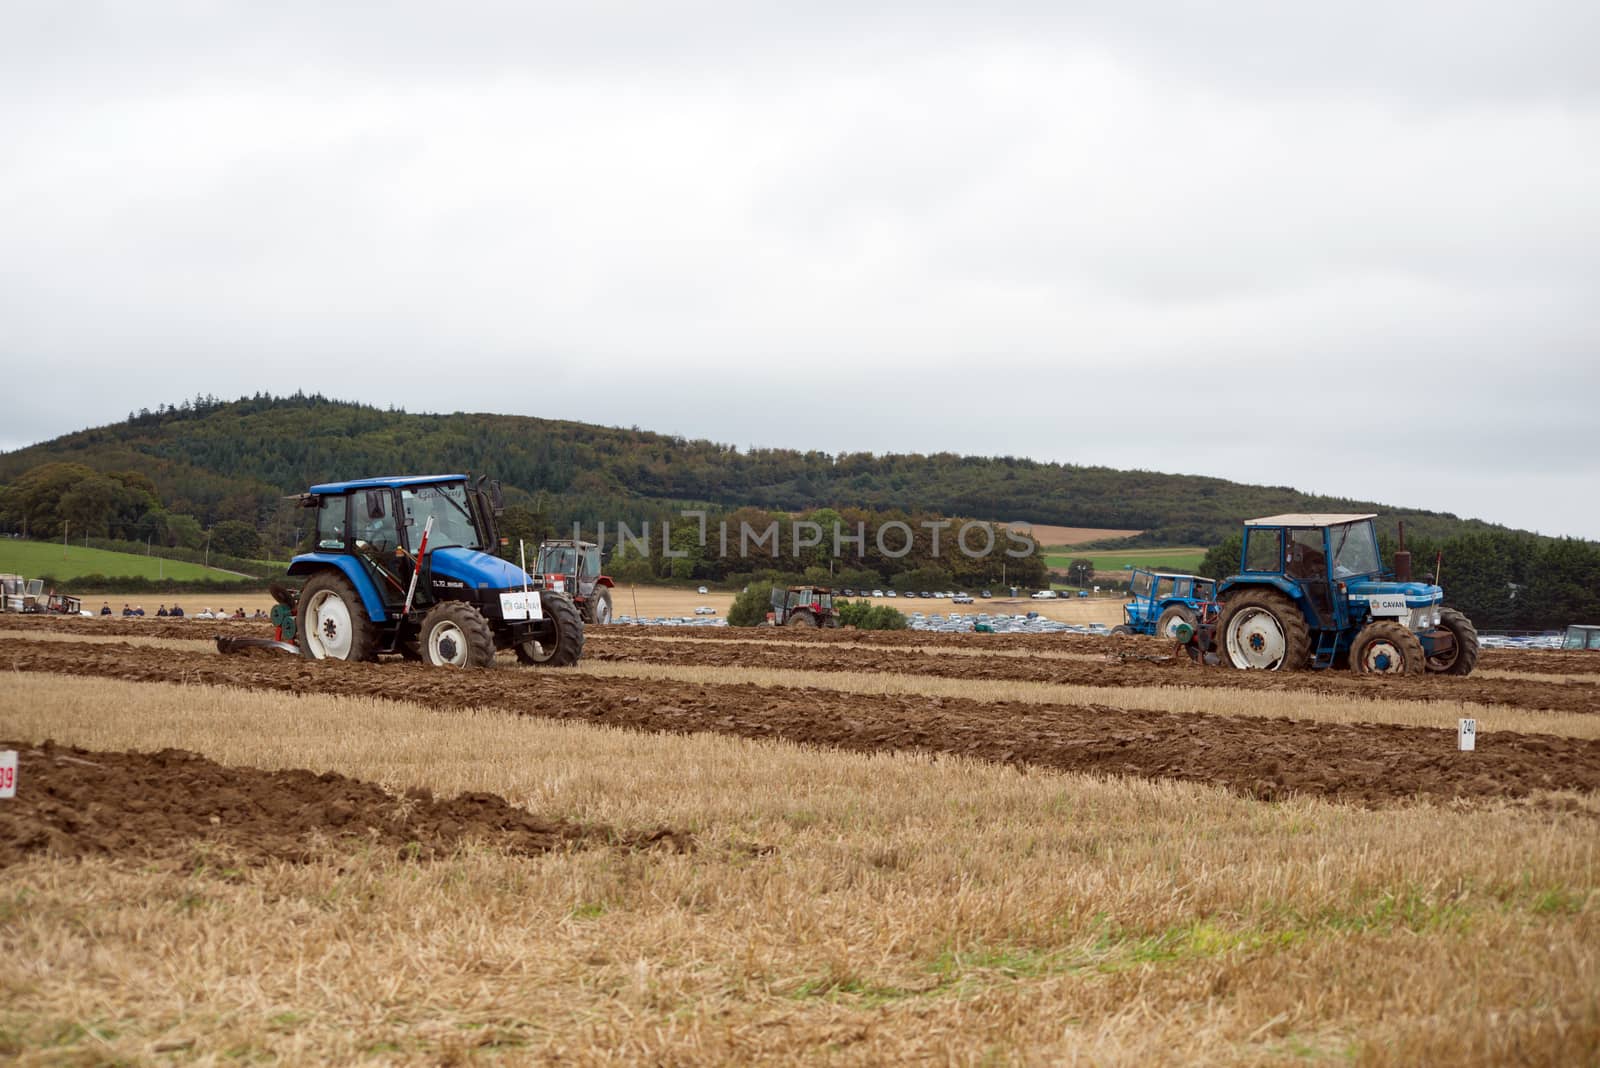 tractors ploughing in the national championships by morrbyte